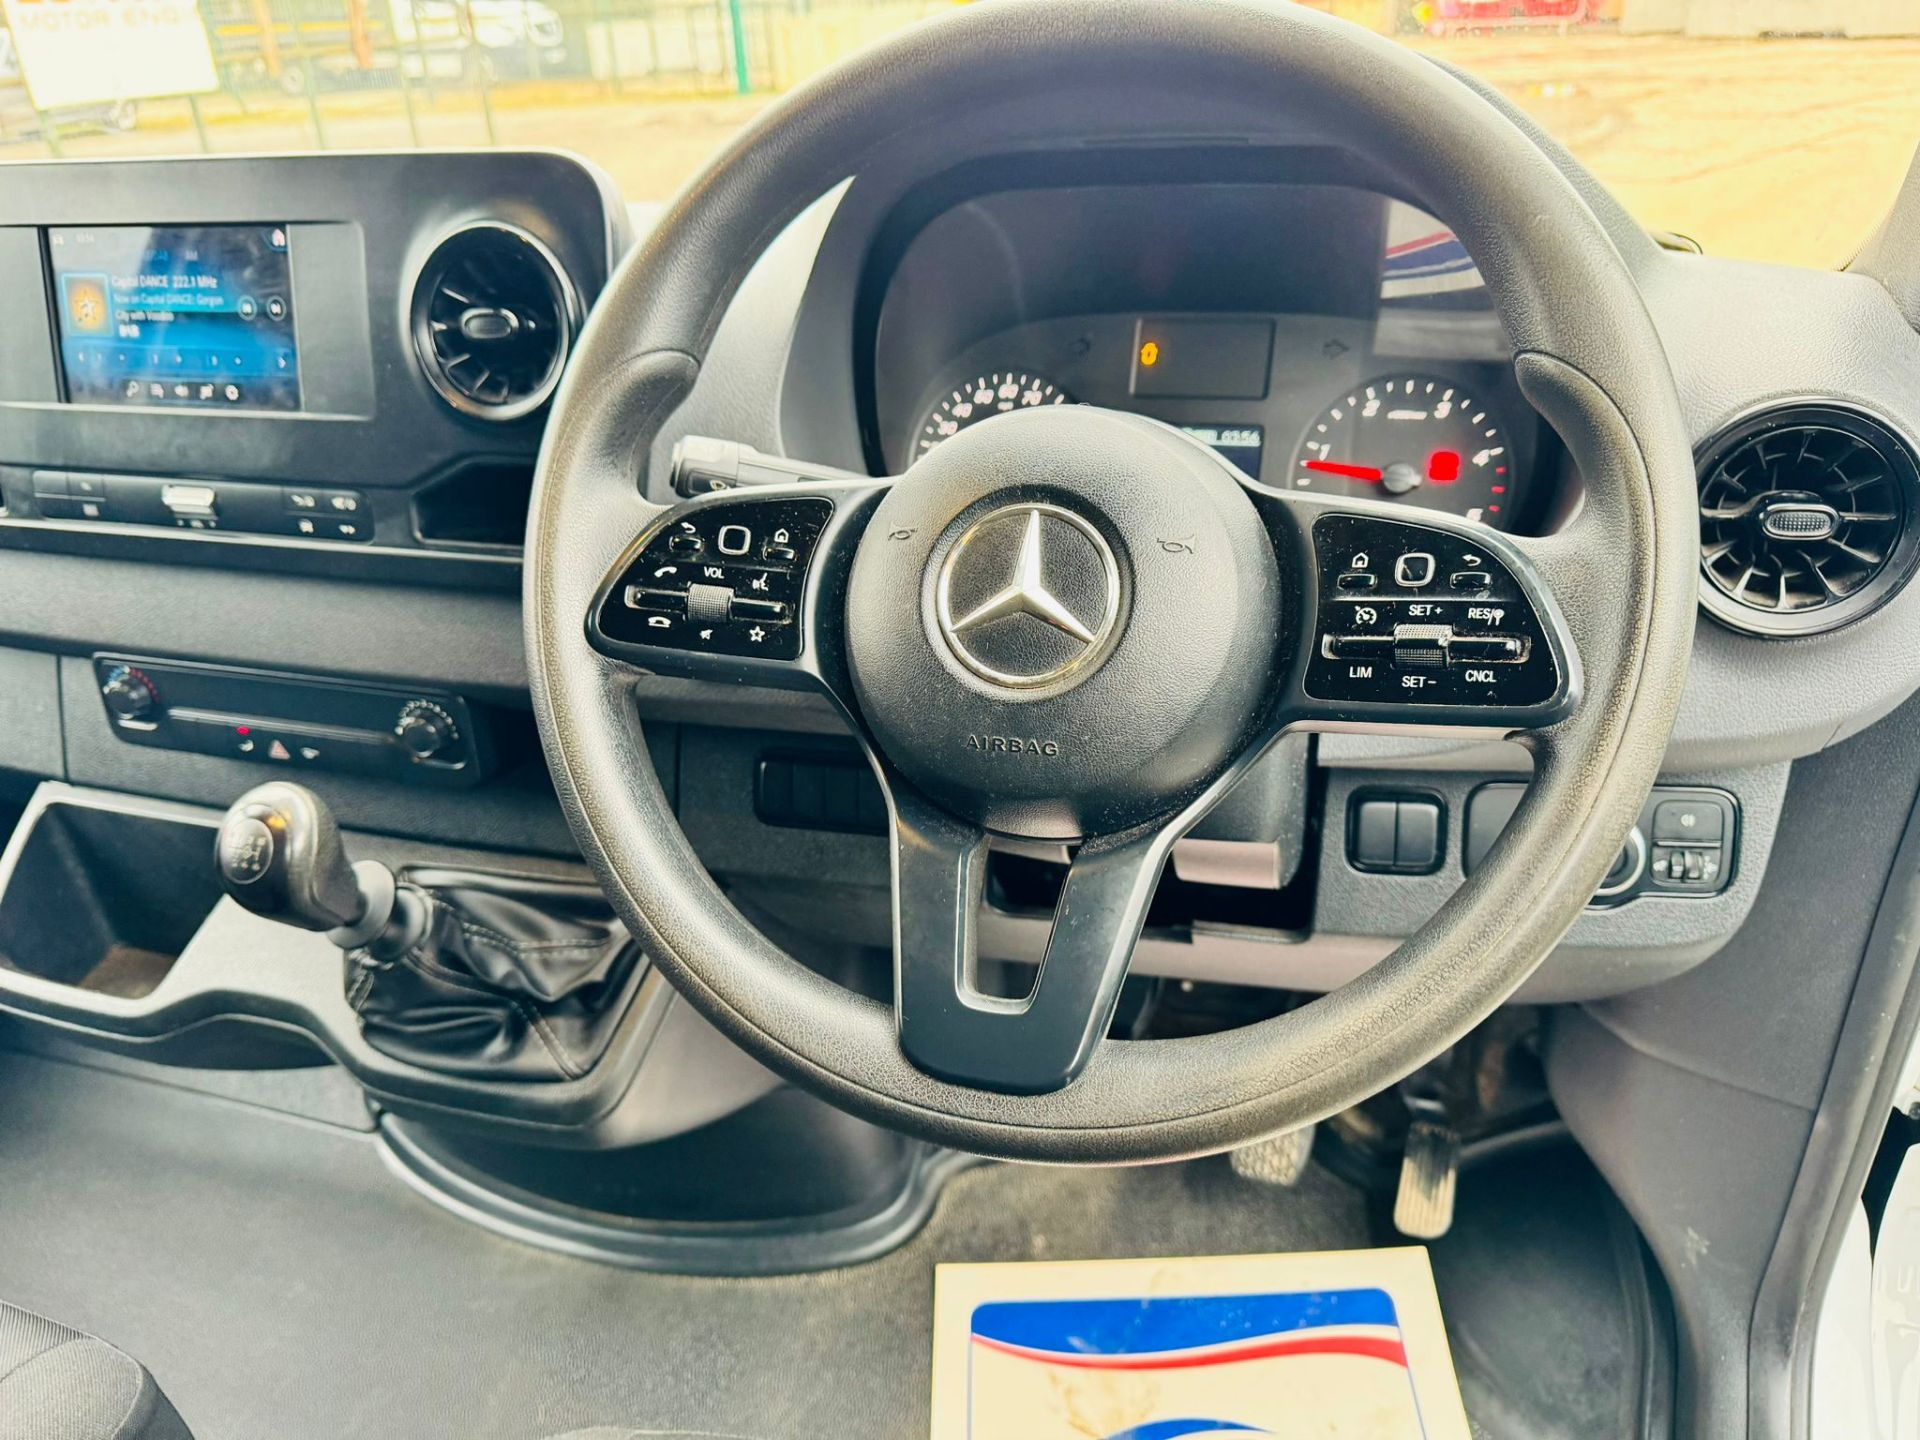 MERCEDES SPRINTER 314CDI MWB HI ROOF - 2019 19 Reg - 1 Owner From New - Euro 6 - NEW SHAPE!! - Image 6 of 8